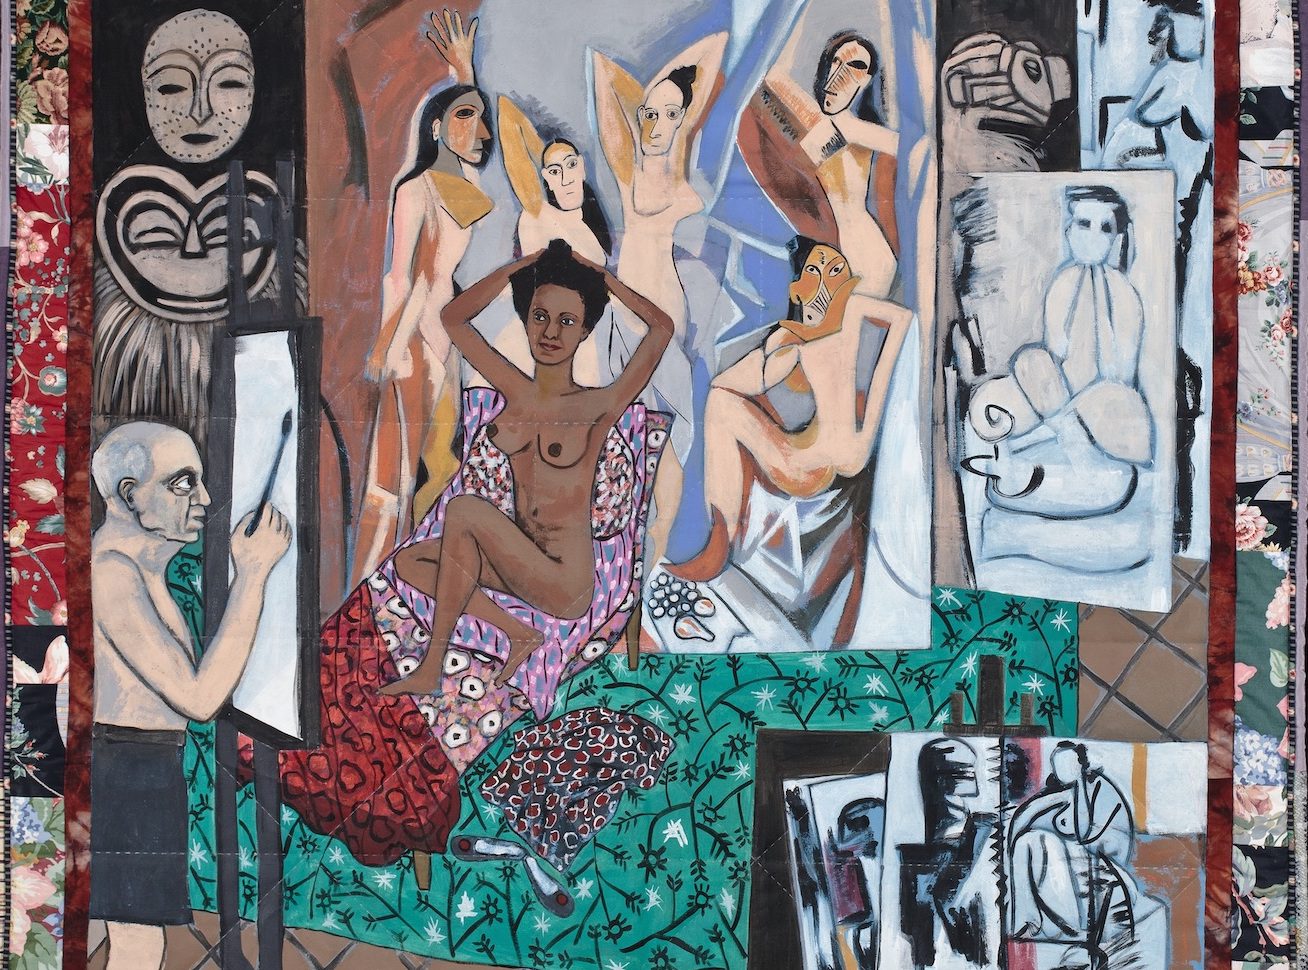 WAM3Faith Ringgold, Picasso’s Studio (Detail), 1991. Acrylic on canvas with printed and tie-dyed fabric 73 x 68 in. Worcester Art Museum, MA, Charlotte E. W. Buffington Fund
716226